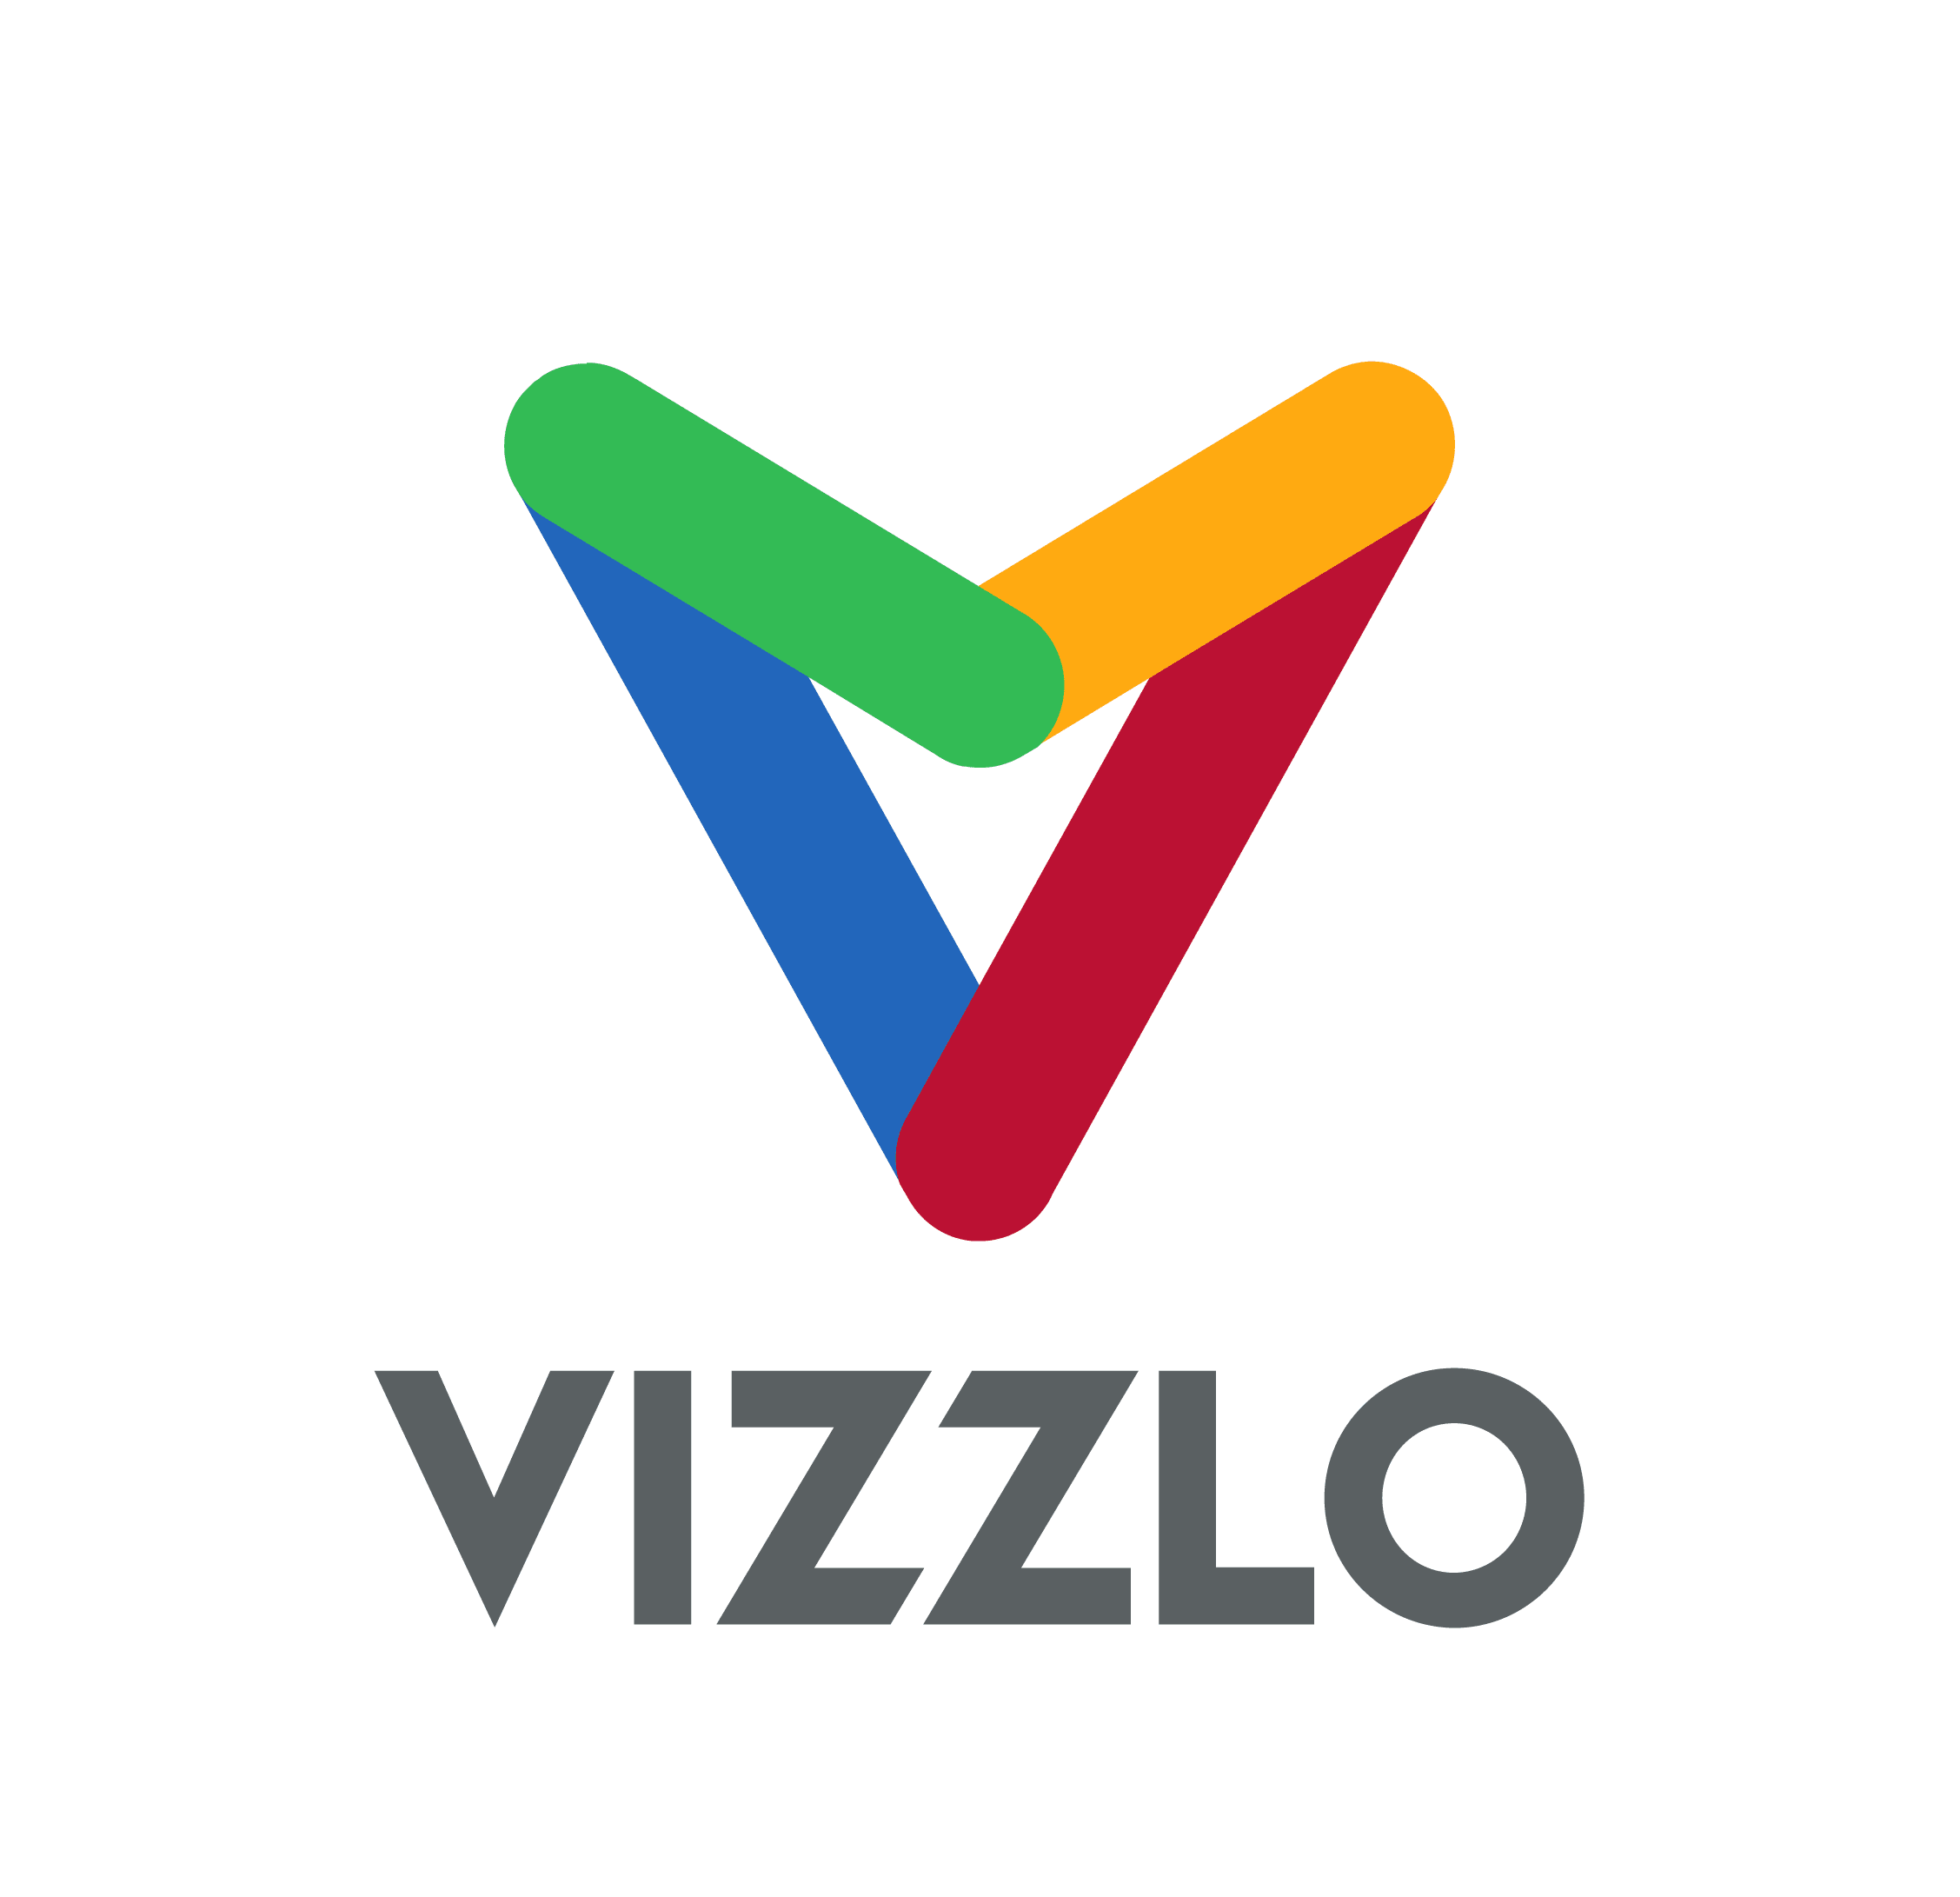 Create charts & business graphics online with Vizzlo